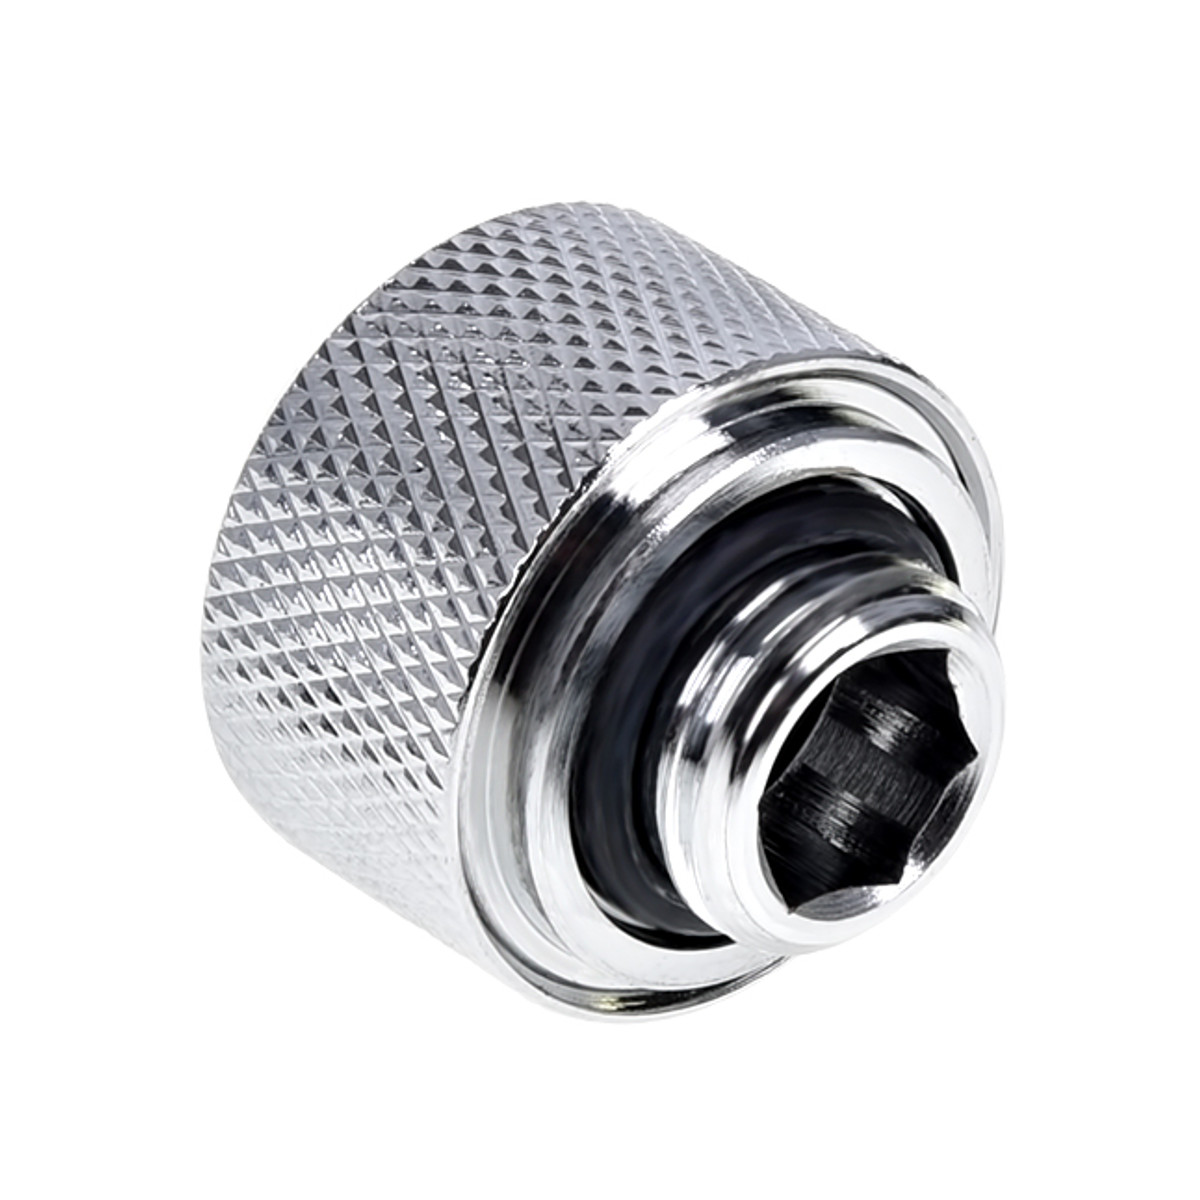 Alphacool - Alphacool Eiszapfen 16mm Chrome Hard Tube Compression Fittings - Six Pack